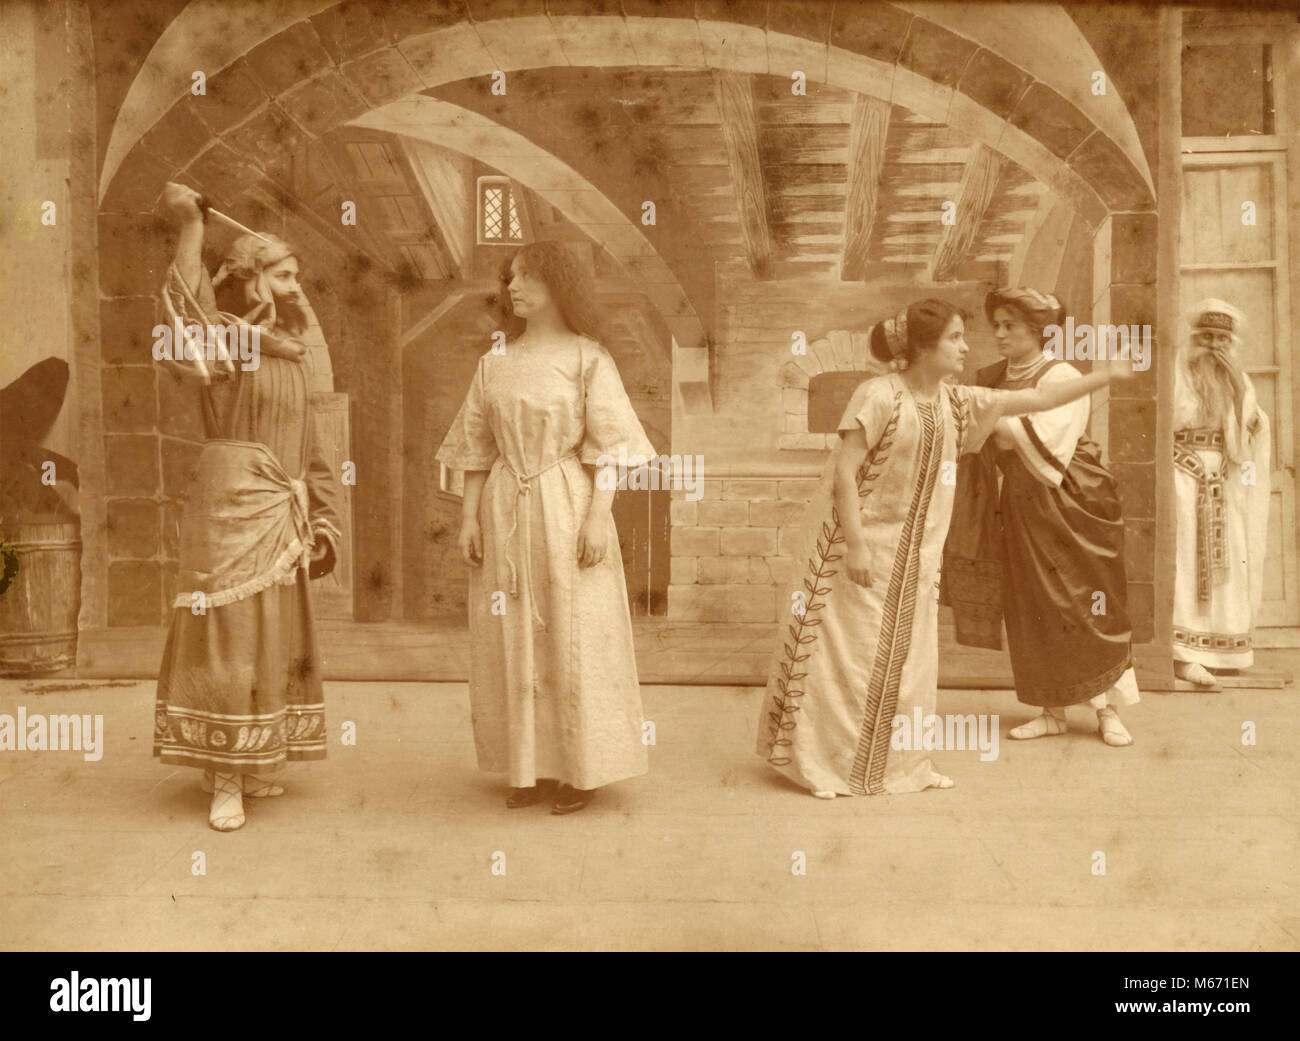 Actors staging at theatre, Italy 1880s Stock Photo